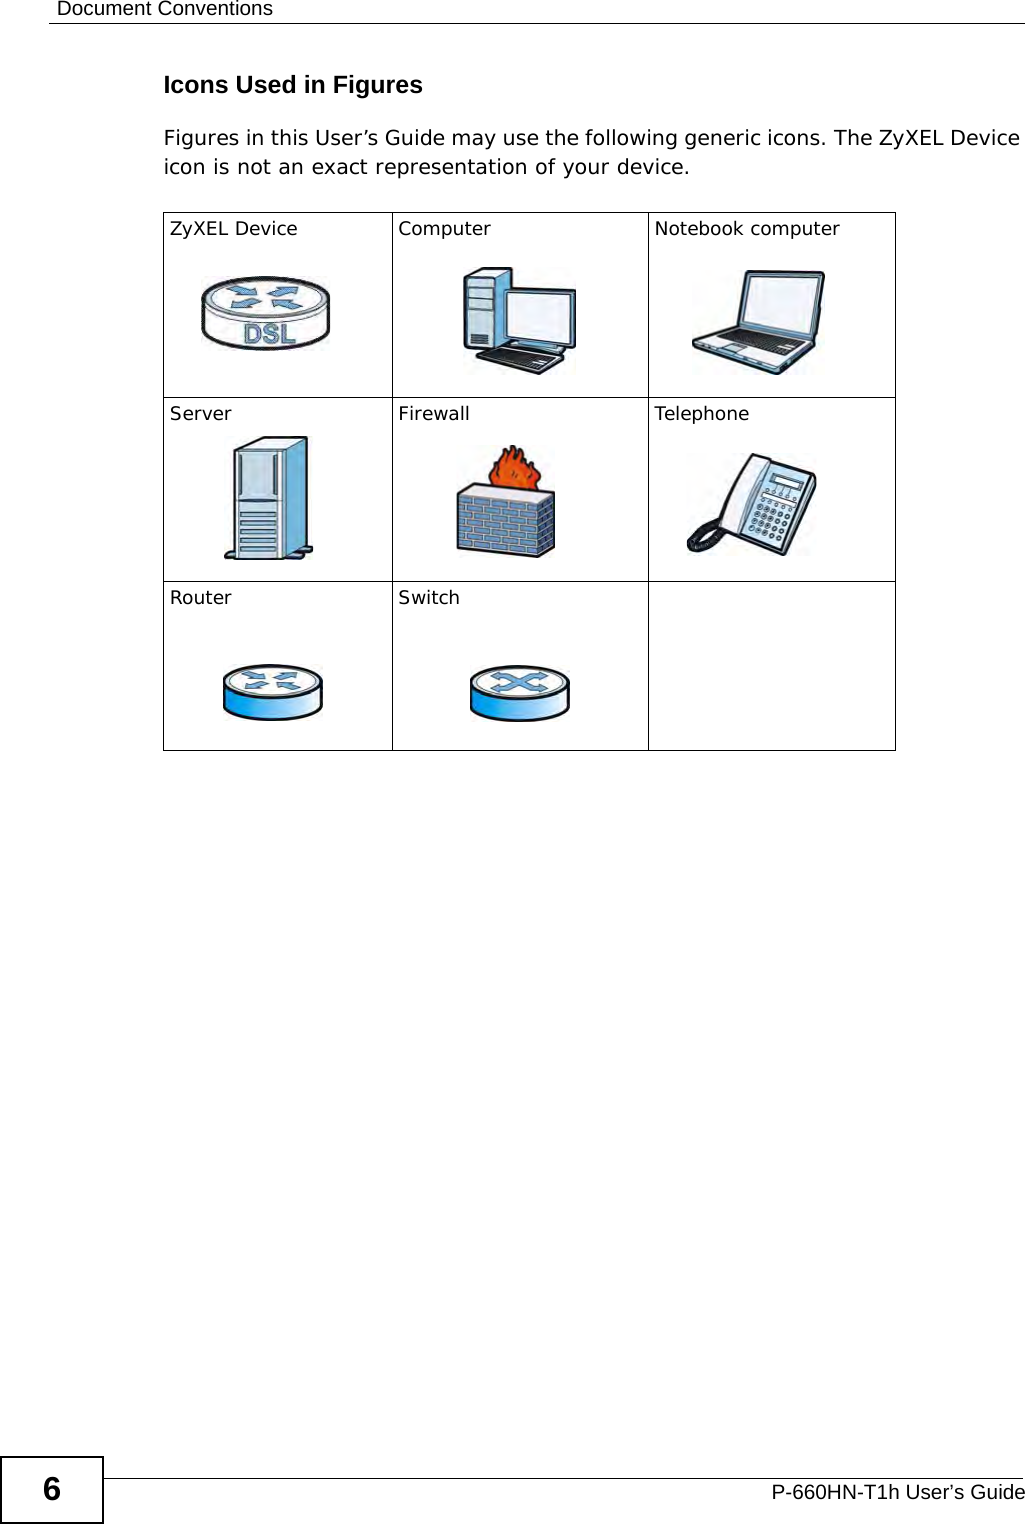 Document ConventionsP-660HN-T1h User’s Guide6Icons Used in FiguresFigures in this User’s Guide may use the following generic icons. The ZyXEL Device icon is not an exact representation of your device.ZyXEL Device Computer Notebook computerServer Firewall TelephoneRouter Switch